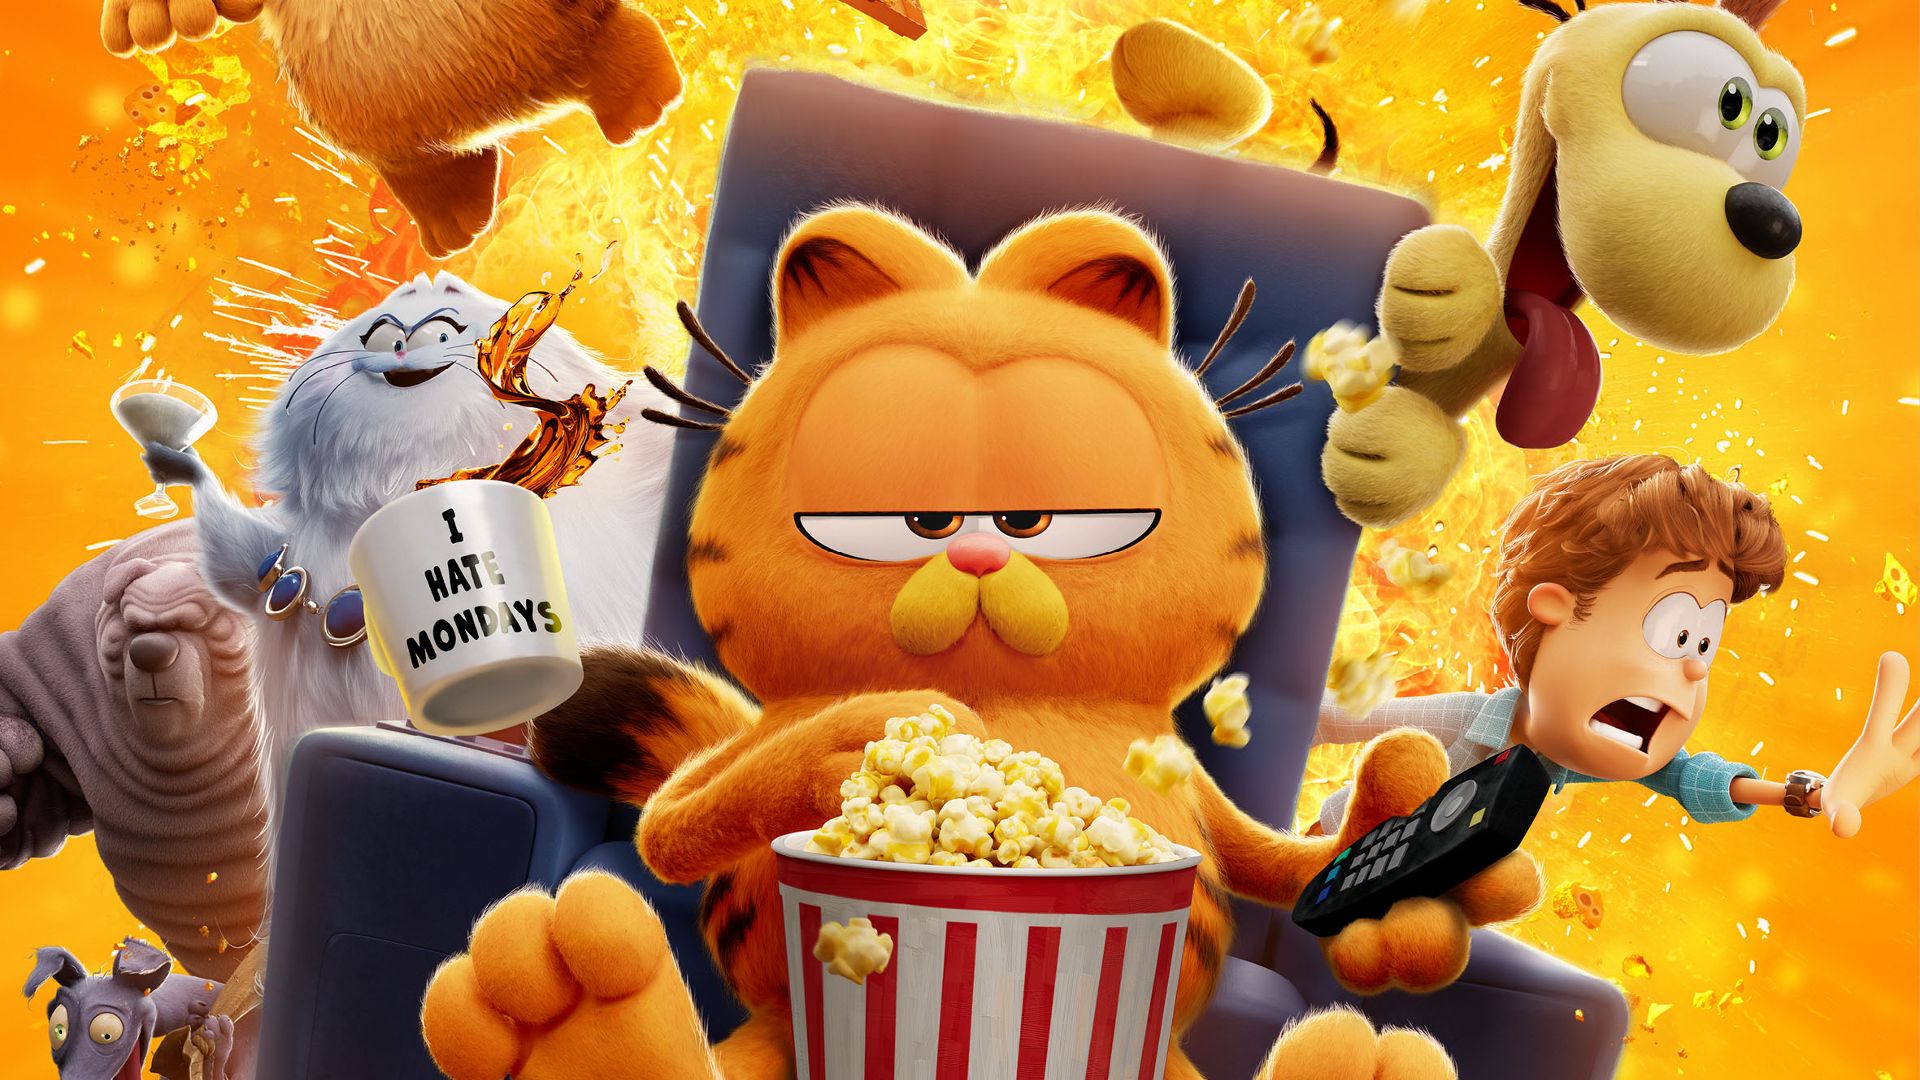 The Garfield Movie with Chris Pratt as the cat eating popcorn in a chair with a remote control while things explode behind him